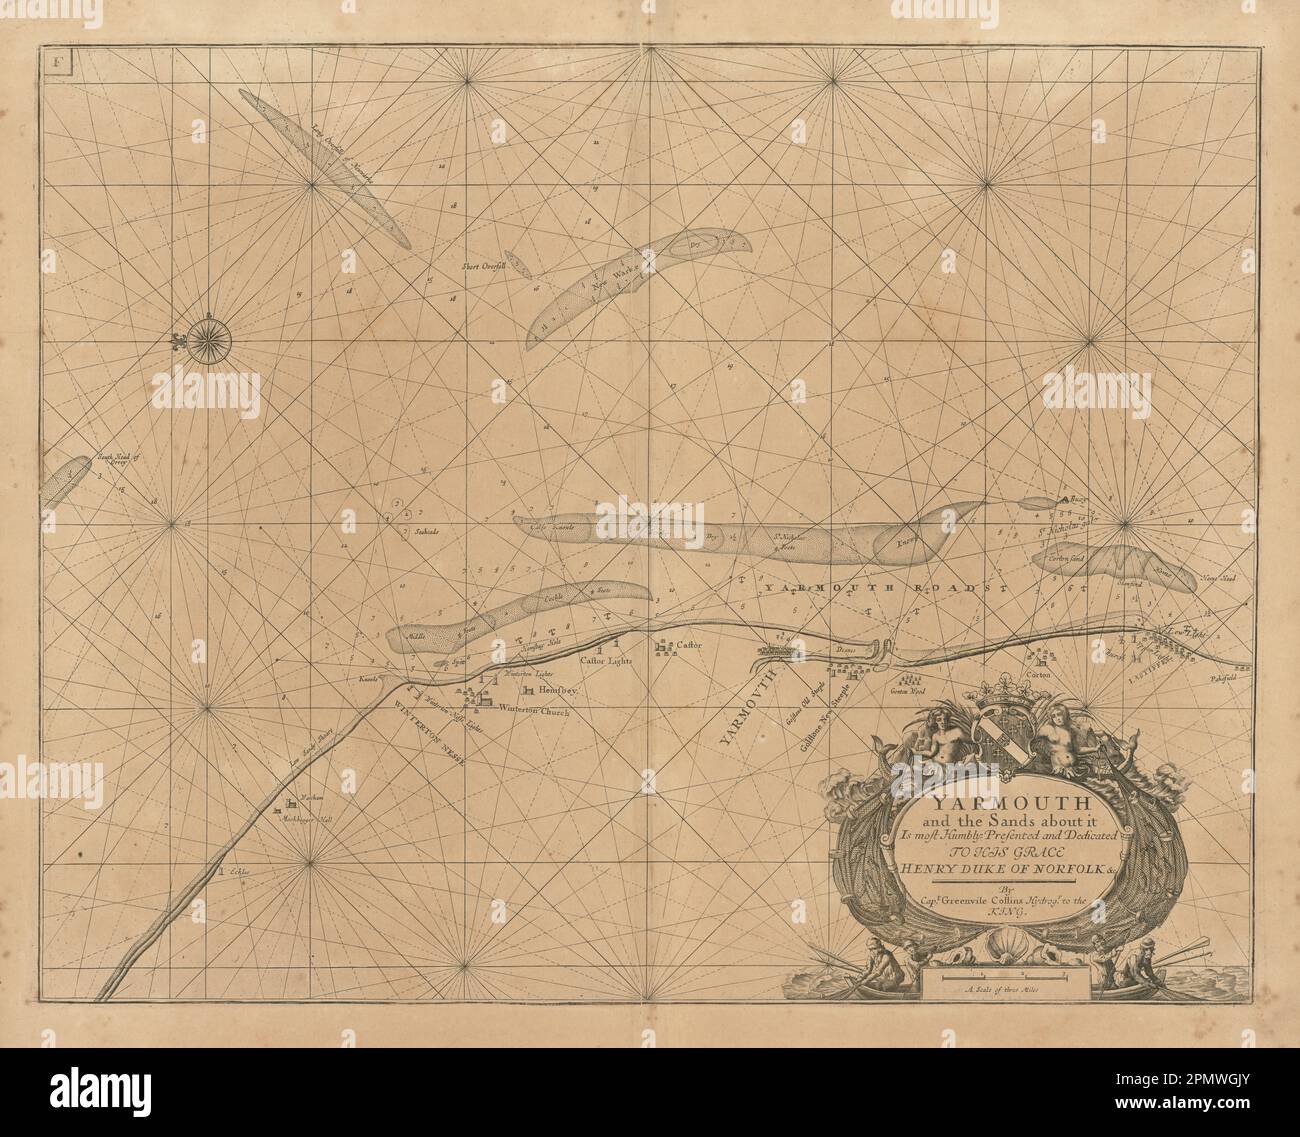 Great Yarmouth and the sands about it sea chart. Lowestoft. COLLINS 1693 map Stock Photo